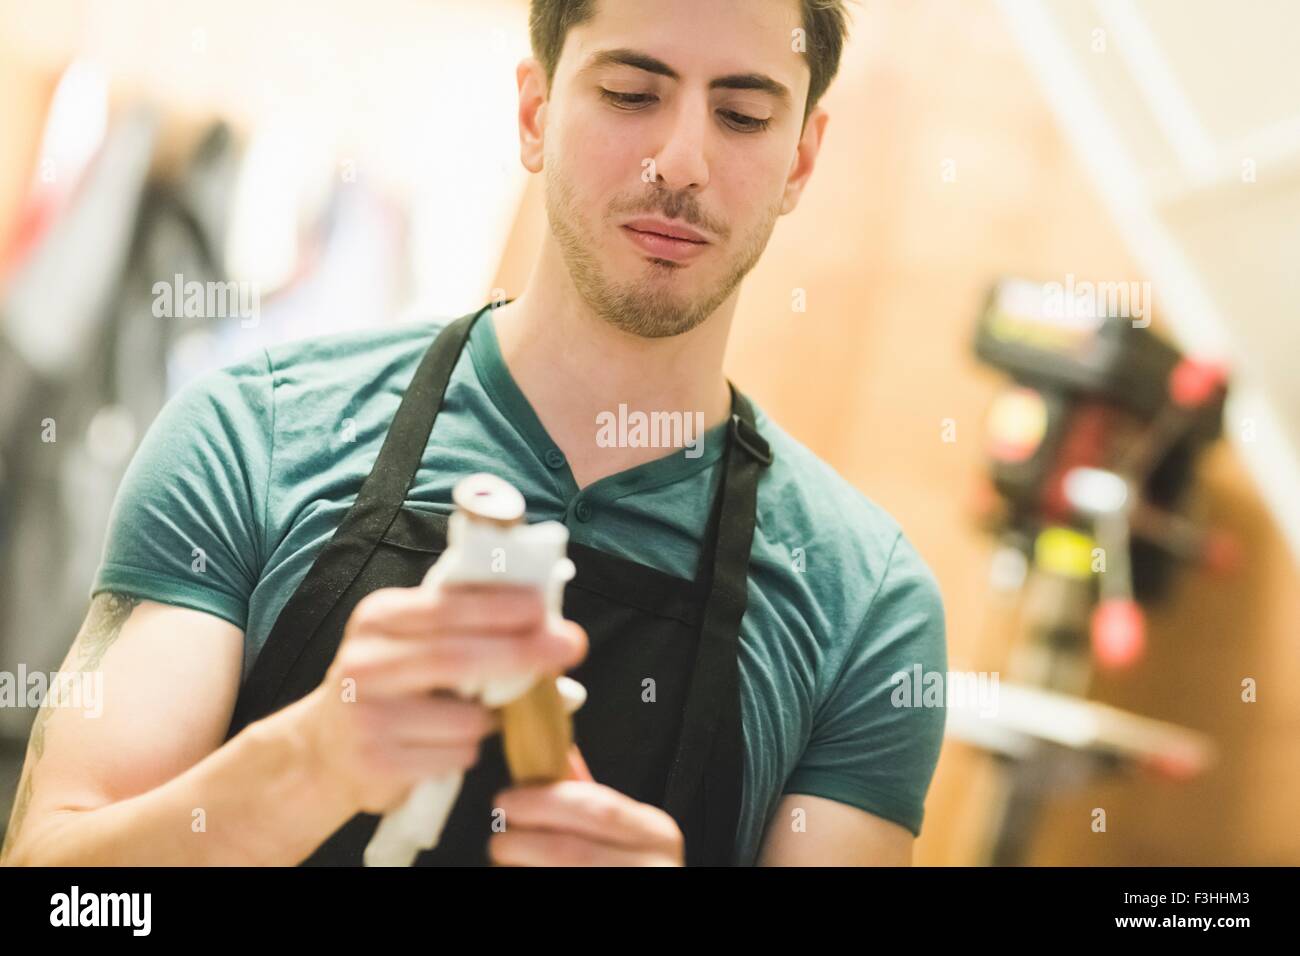 Young man wearing apron crafting wood object, looking down Stock Photo